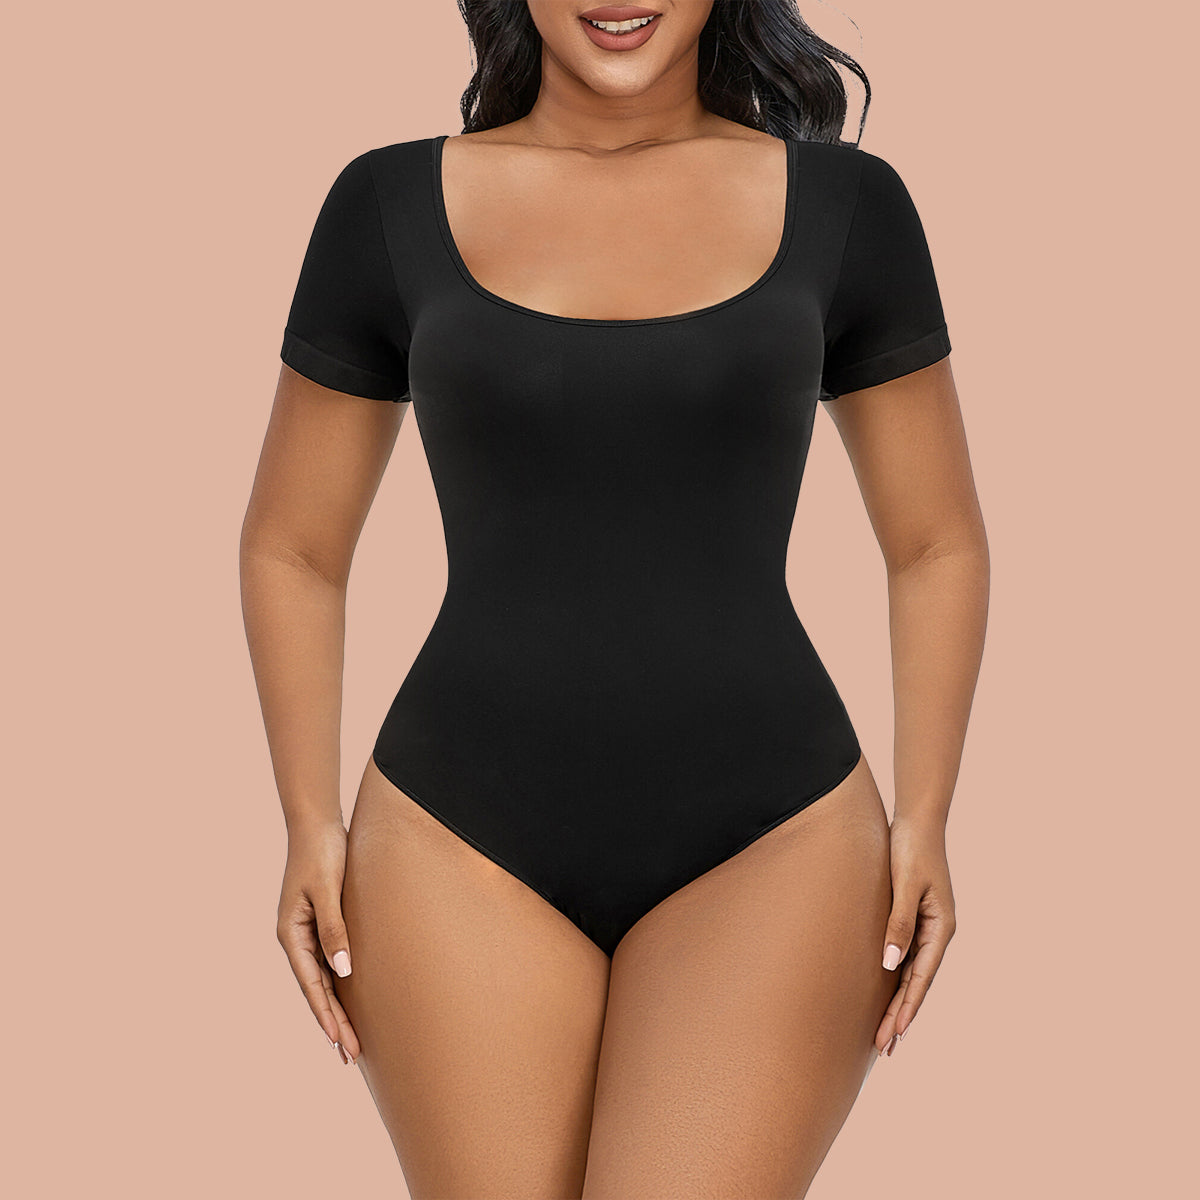 PIKADINGNIS Women's Square Neck Thong Shapewear Notch Short Sleeve Slimming  Bodysuit Tops for Women Going Out/Tummy Control 